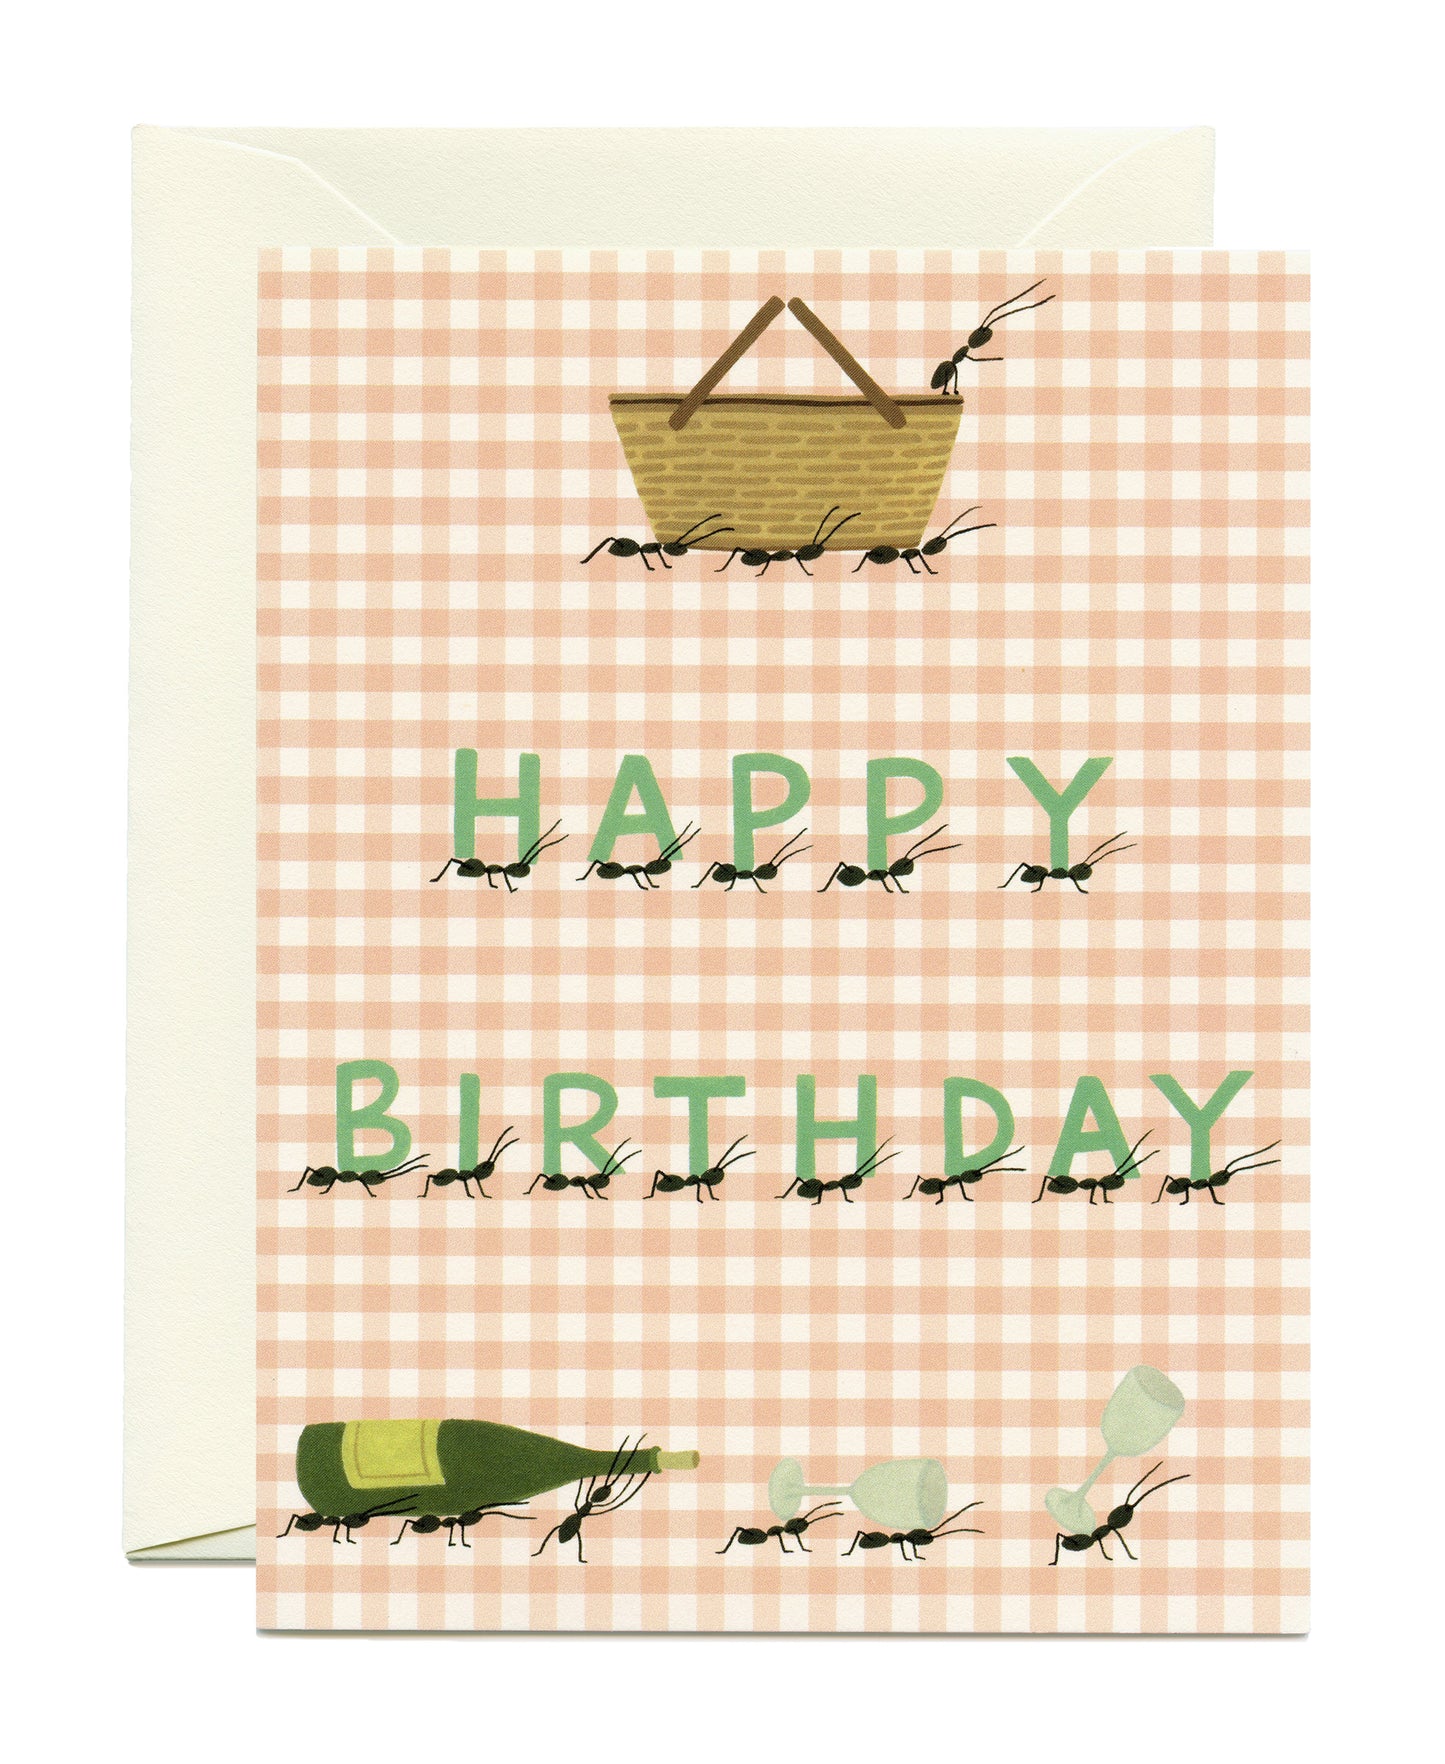 MARCHING ANTS PICNIC - BIRTHDAY GREETING CARD